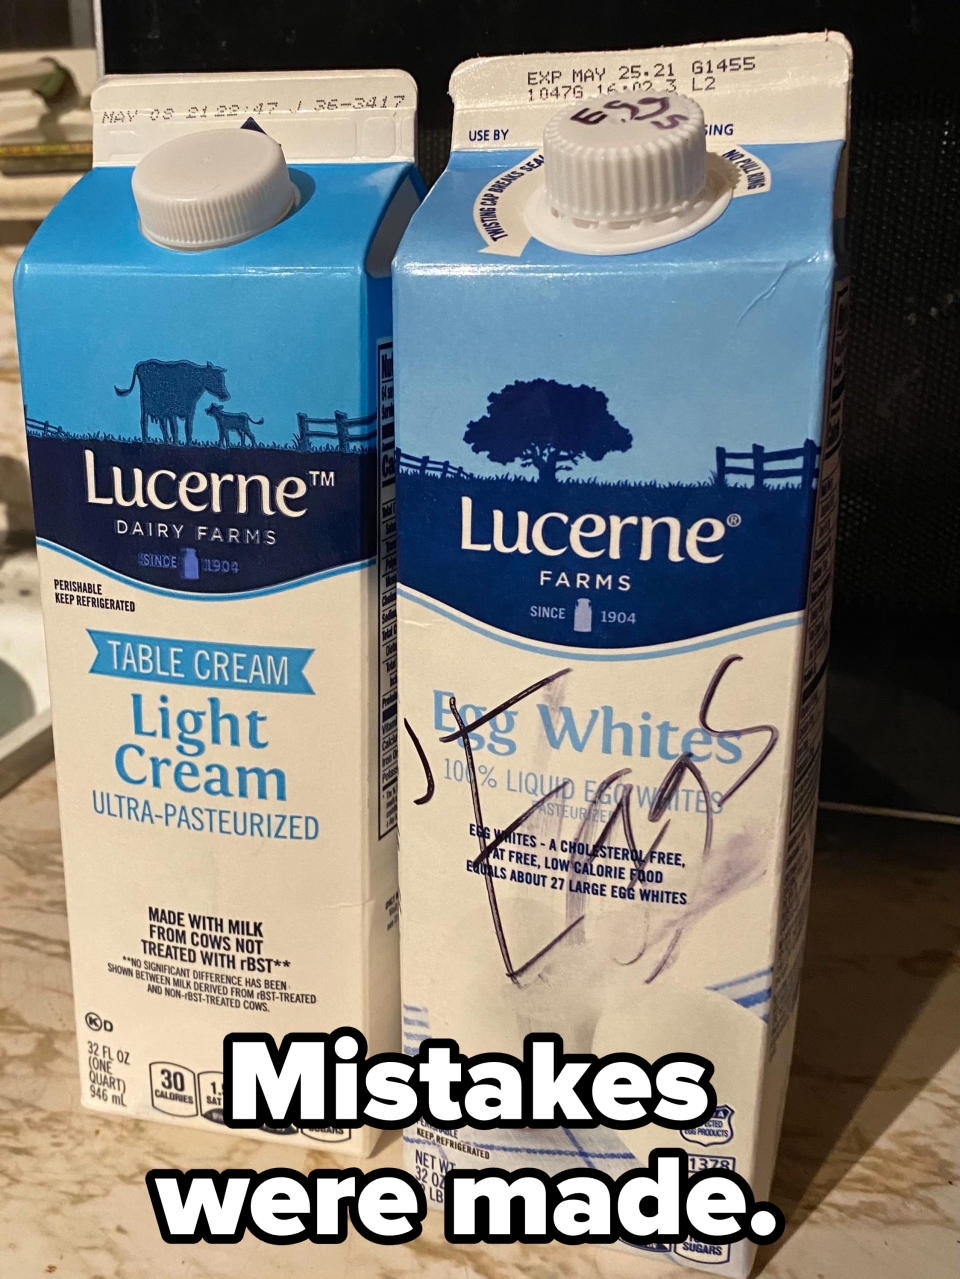 Two cartons from Lucerne Dairy Farms: one of light cream on the left and one of egg whites on the right